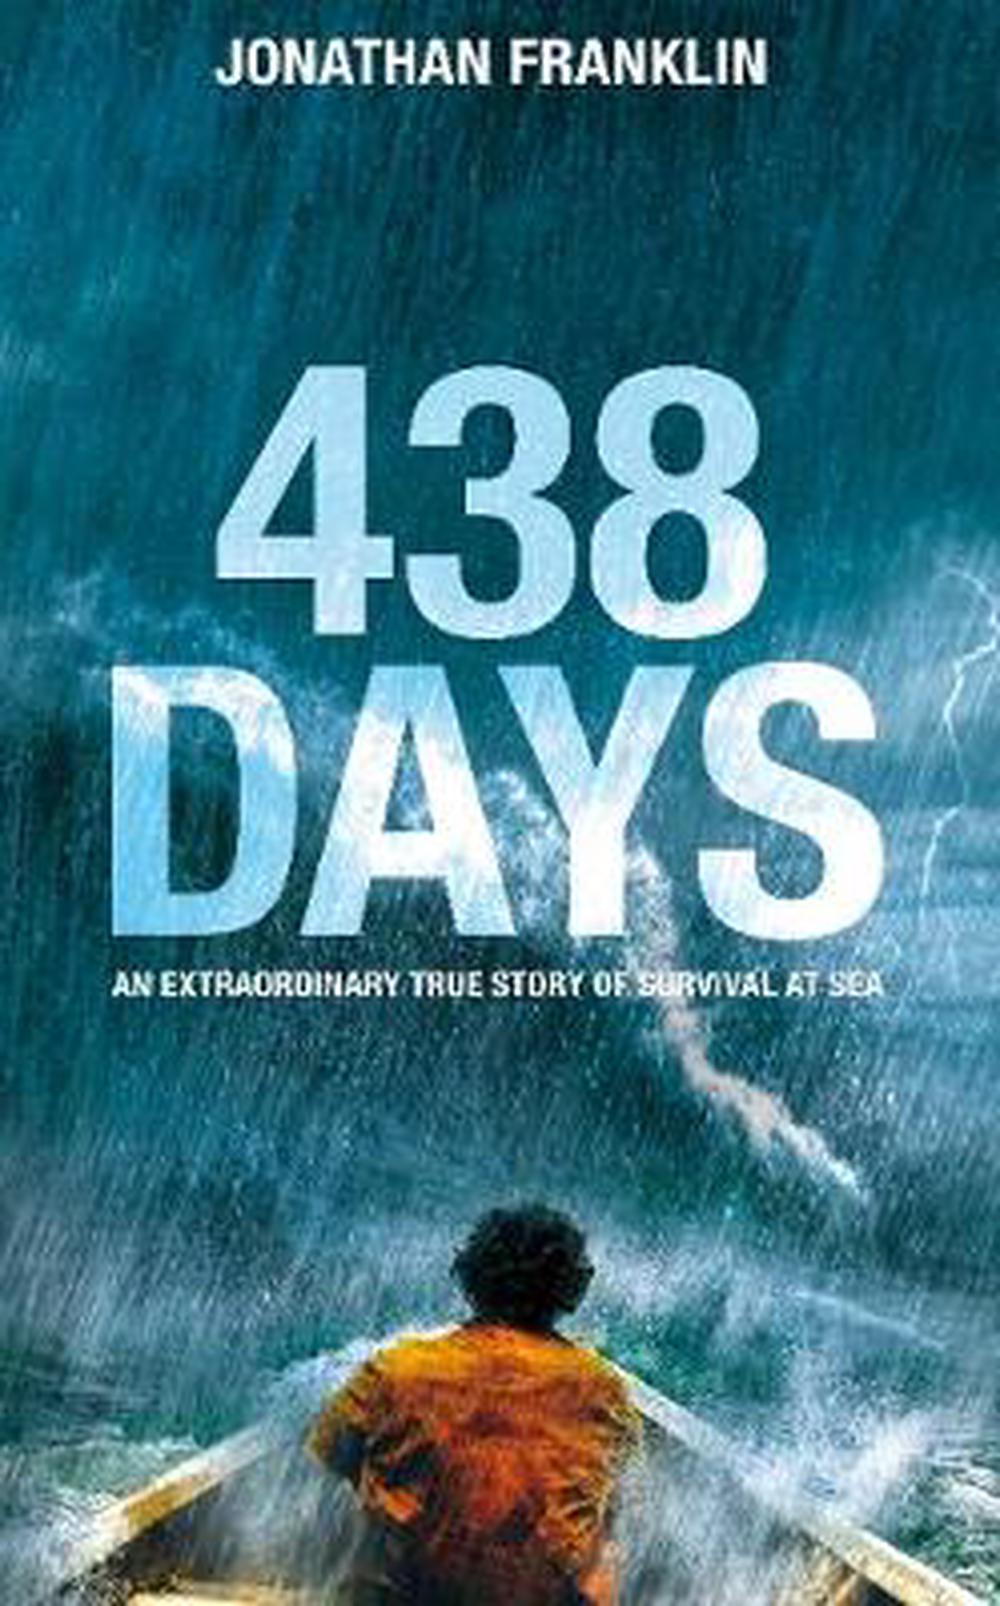 438 days an extraordinary true story of survival at sea